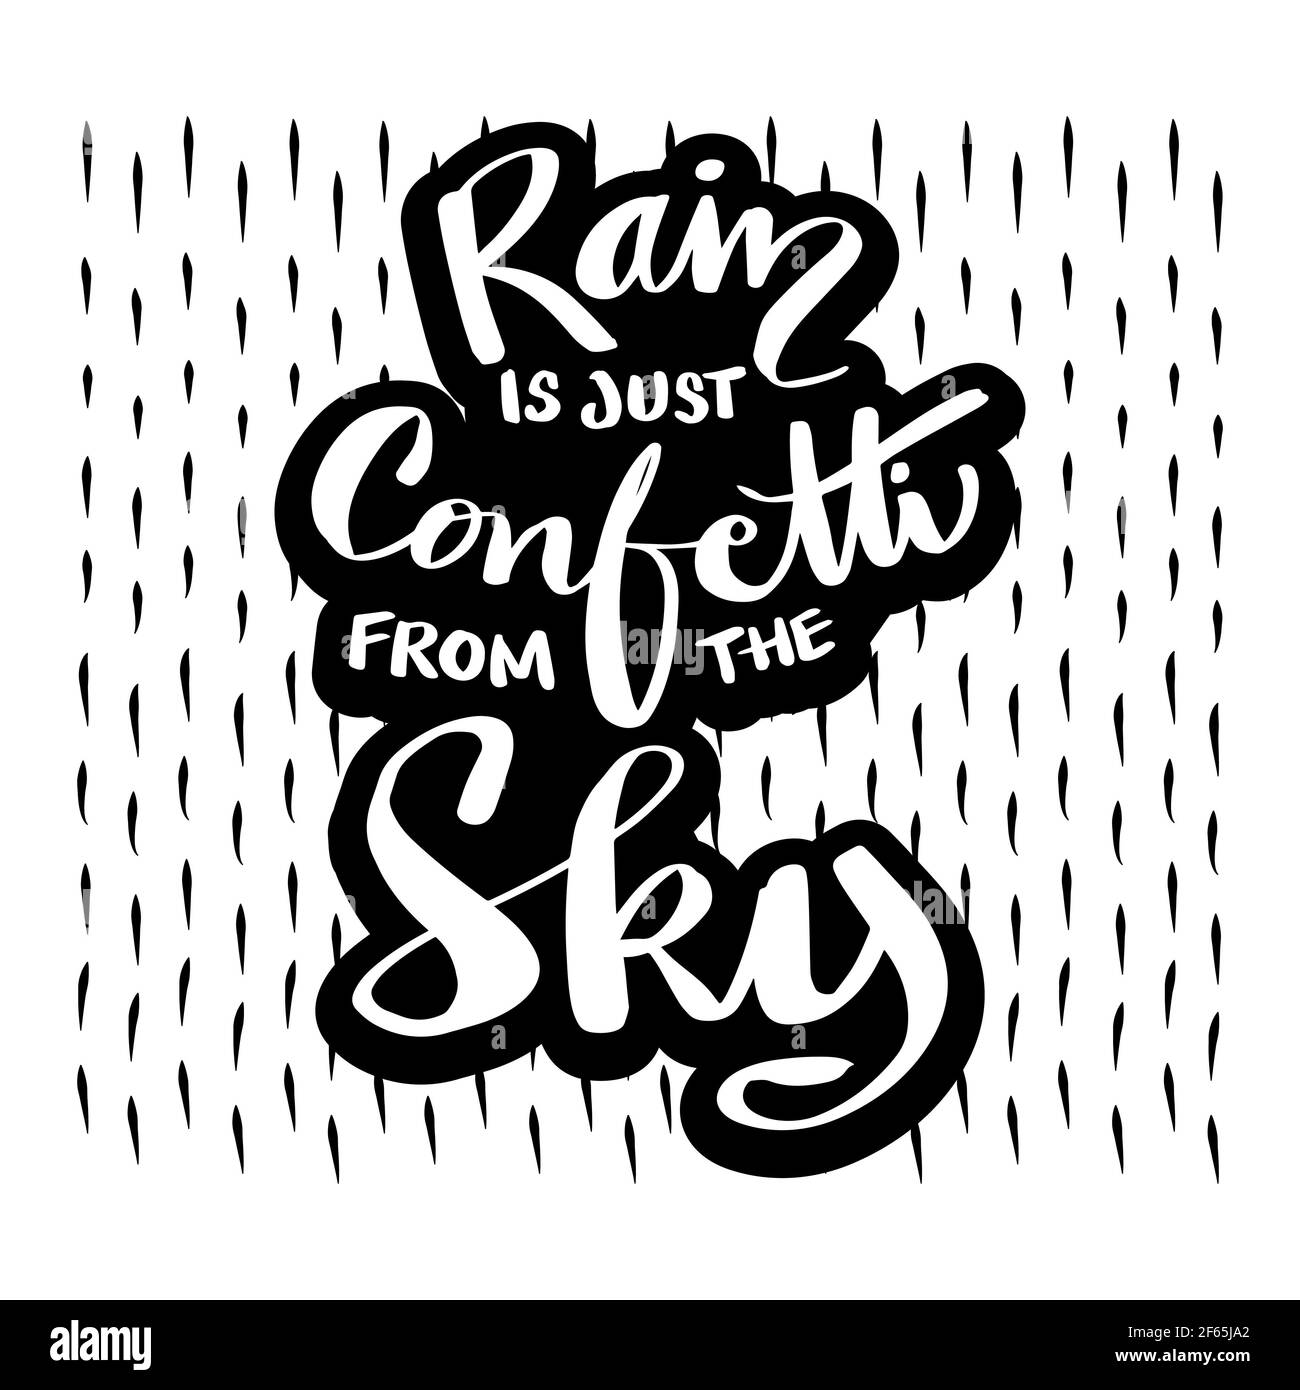 Rain is just confetti from the sky. Motivational quote. Stock Photo